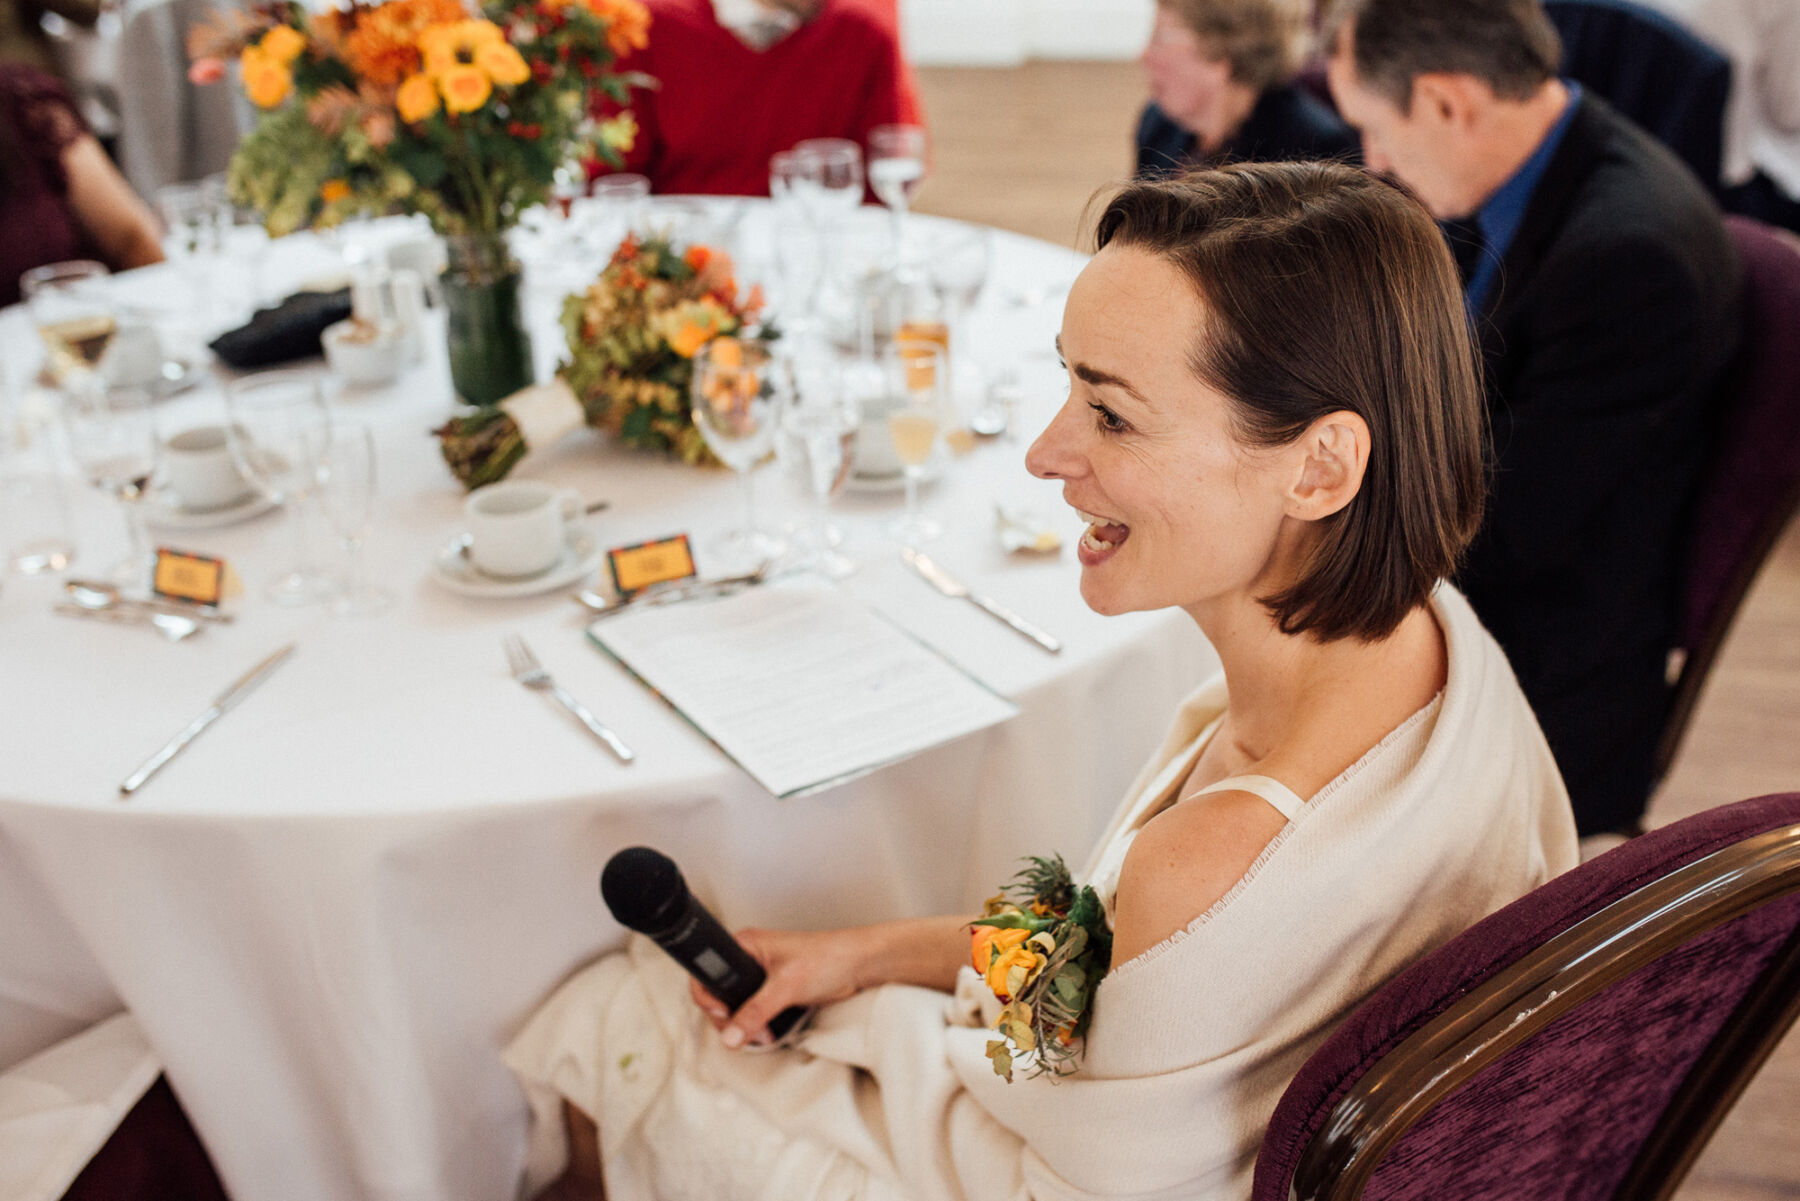 Bride with a microphone ready to do a speech at her wedding.